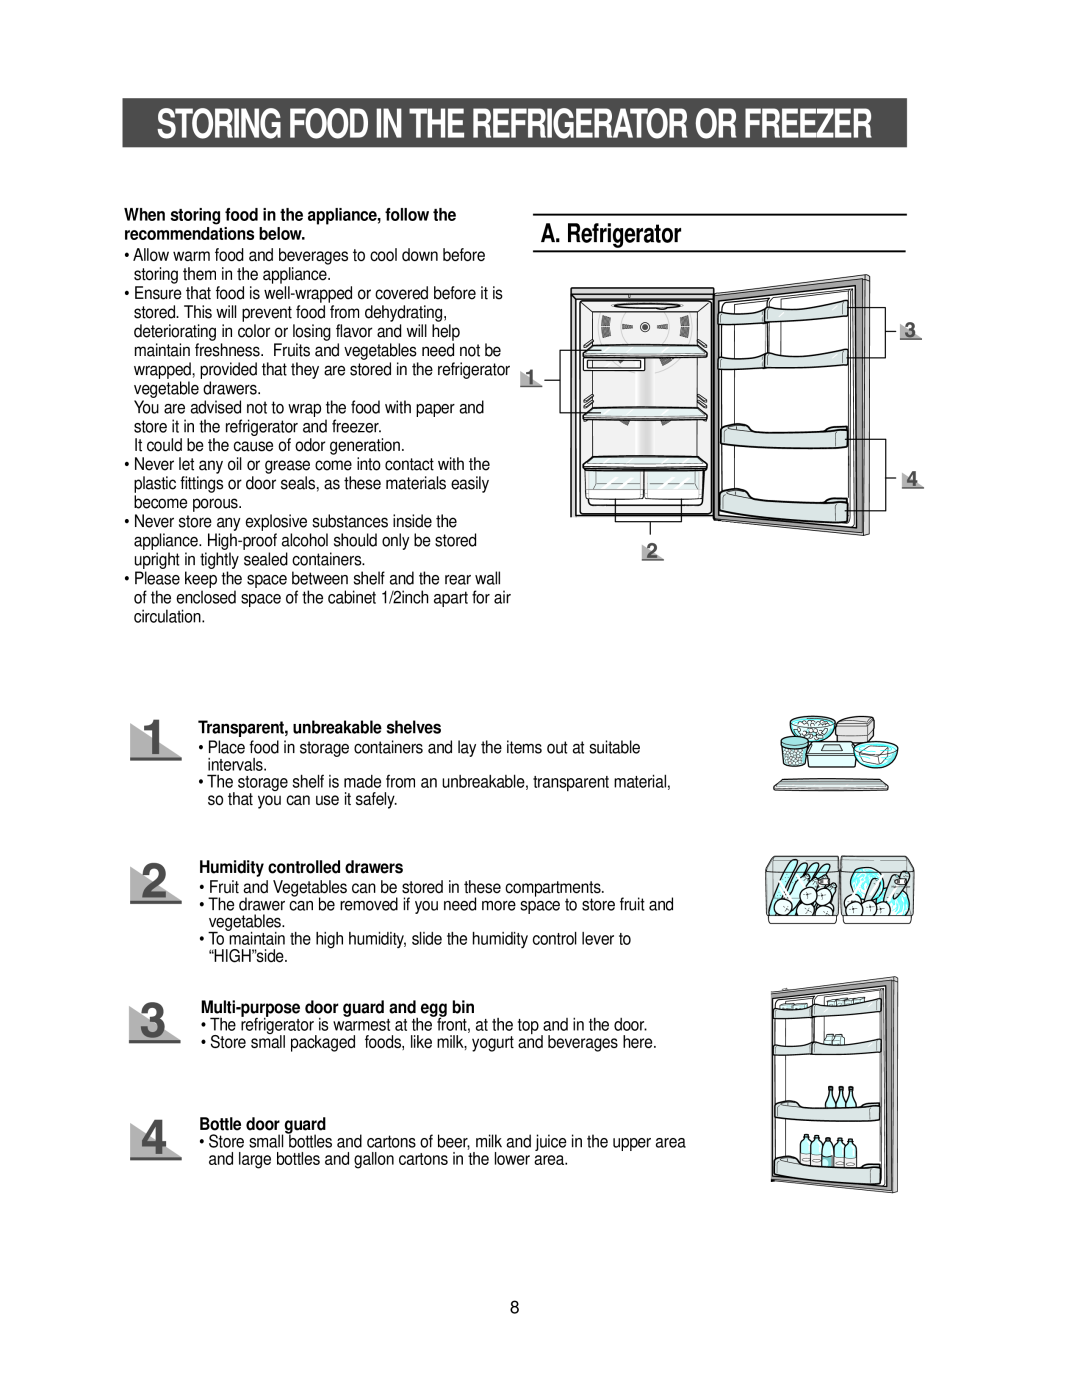 Samsung RB2055SL A. Refrigerator, When storing food in the appliance, follow the recommendations below, Bottle door guard 